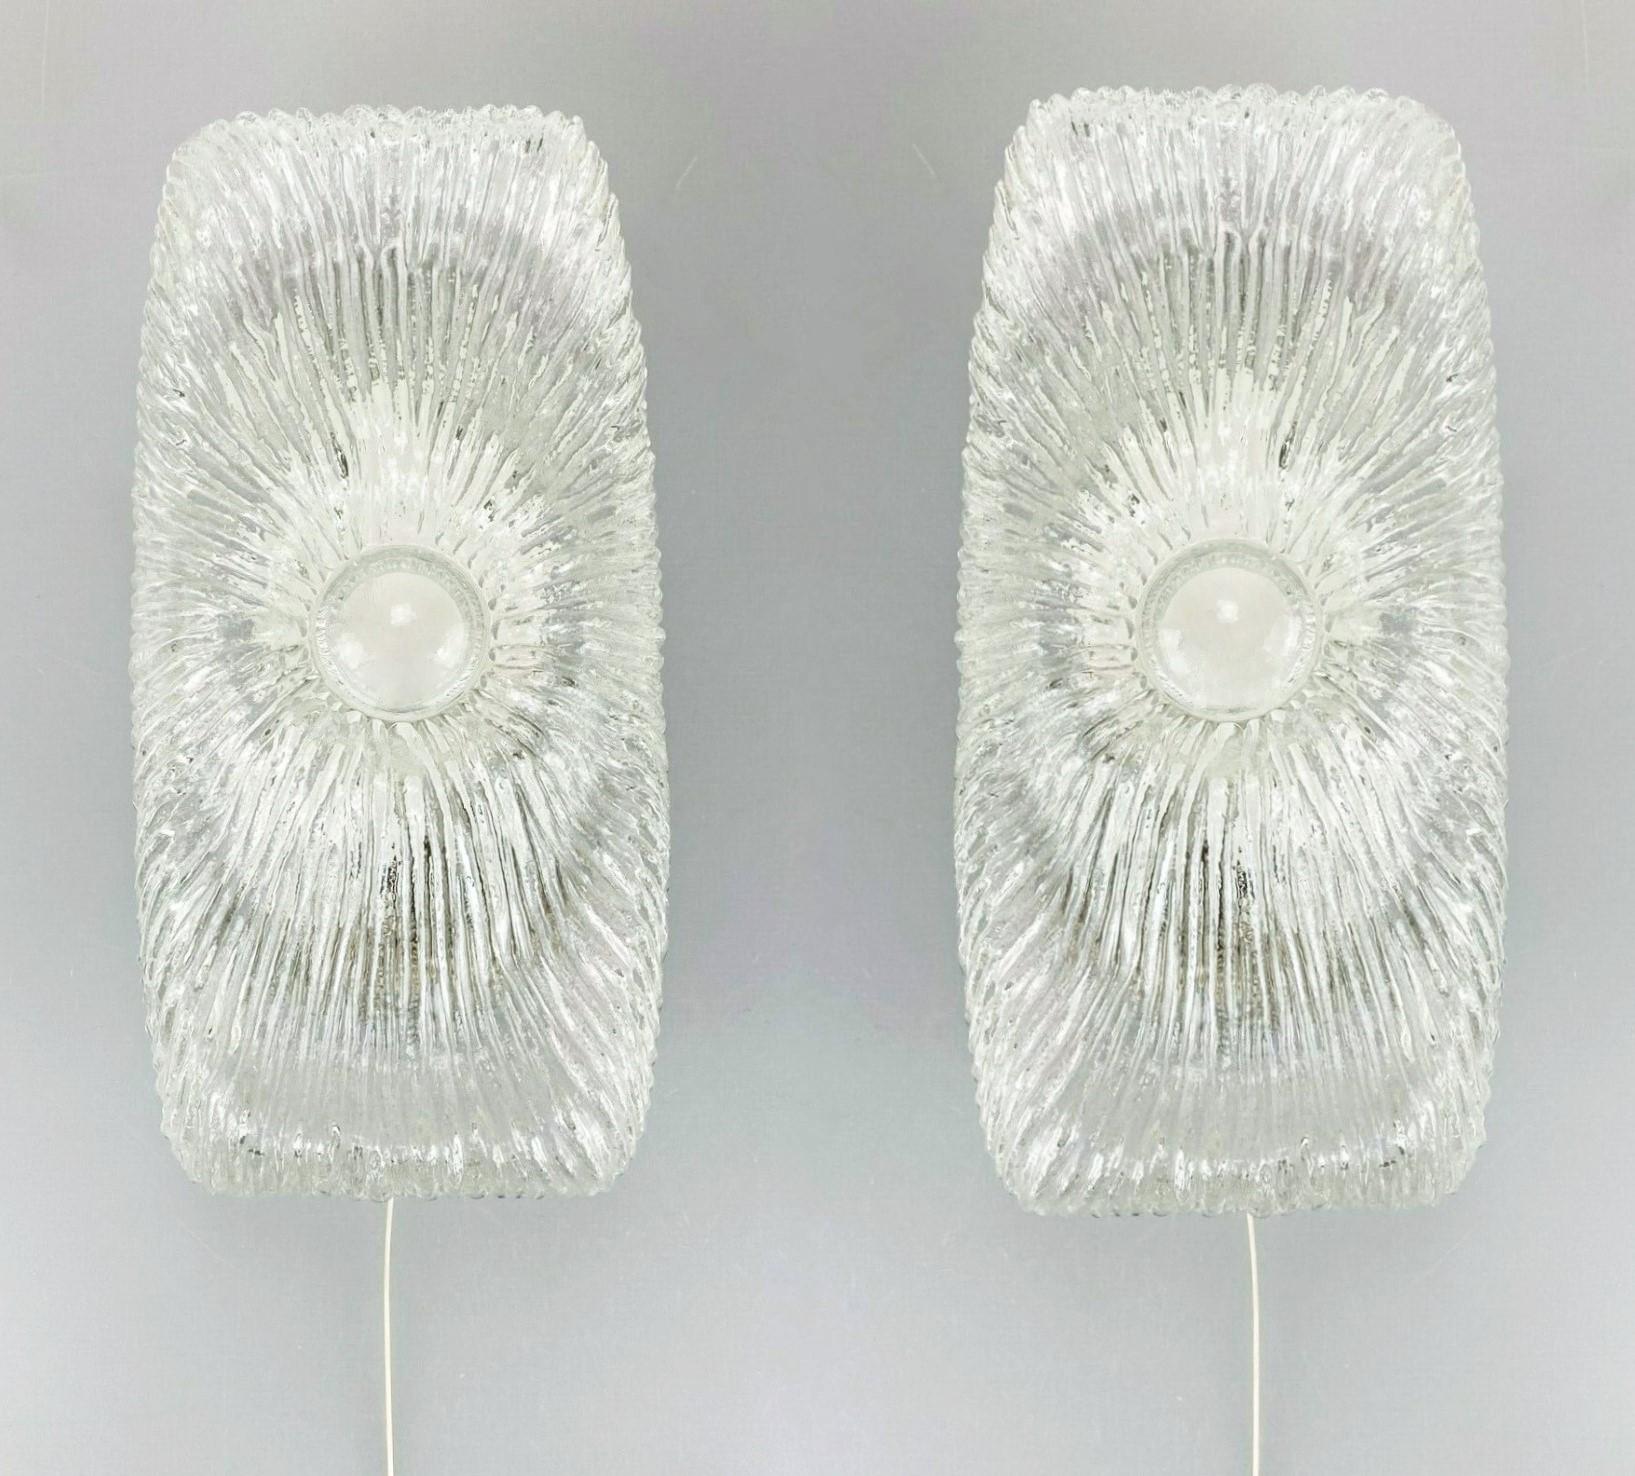 Beautiful pair of vintage midcentury Murano ice glass wall lights, Italy, 1960-1965. Modernist textured clear iced glass shades with black metal frames, one ceramic light socket. For a E14 screw bulb up to 60Watt (each sconce).
The glass shades